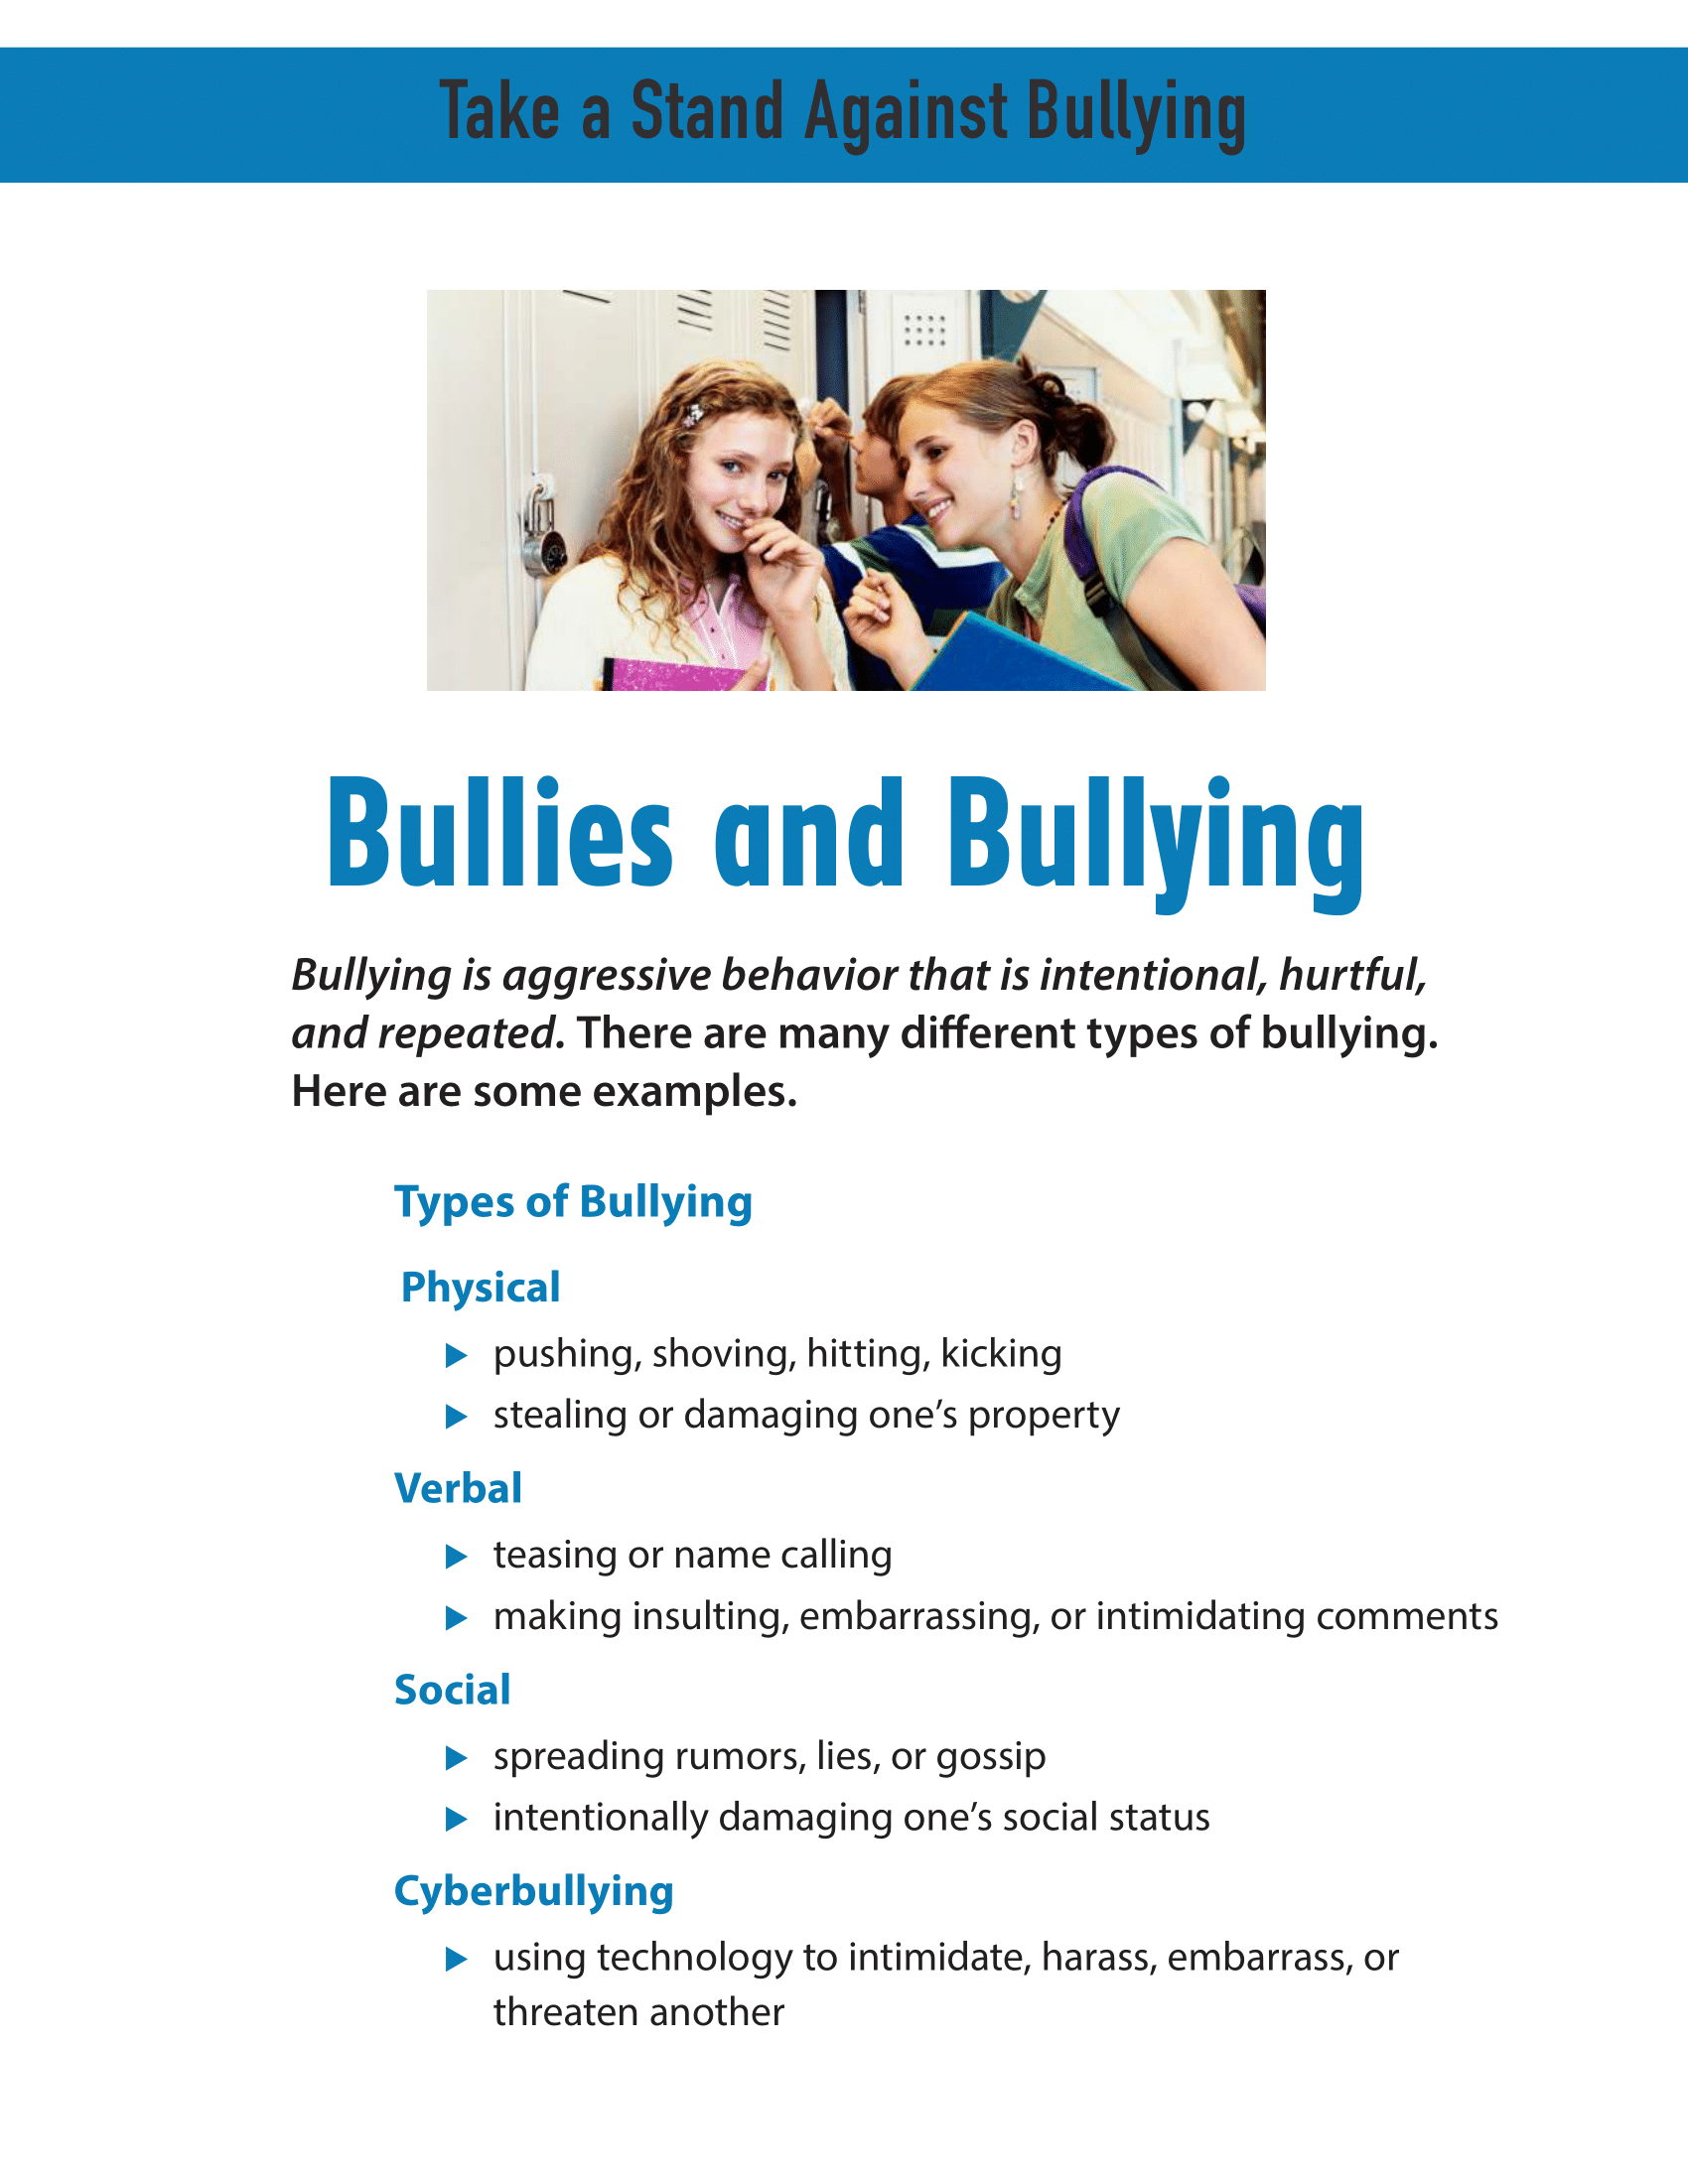 Take a Stand Against Bullying - Bullies and Bullying